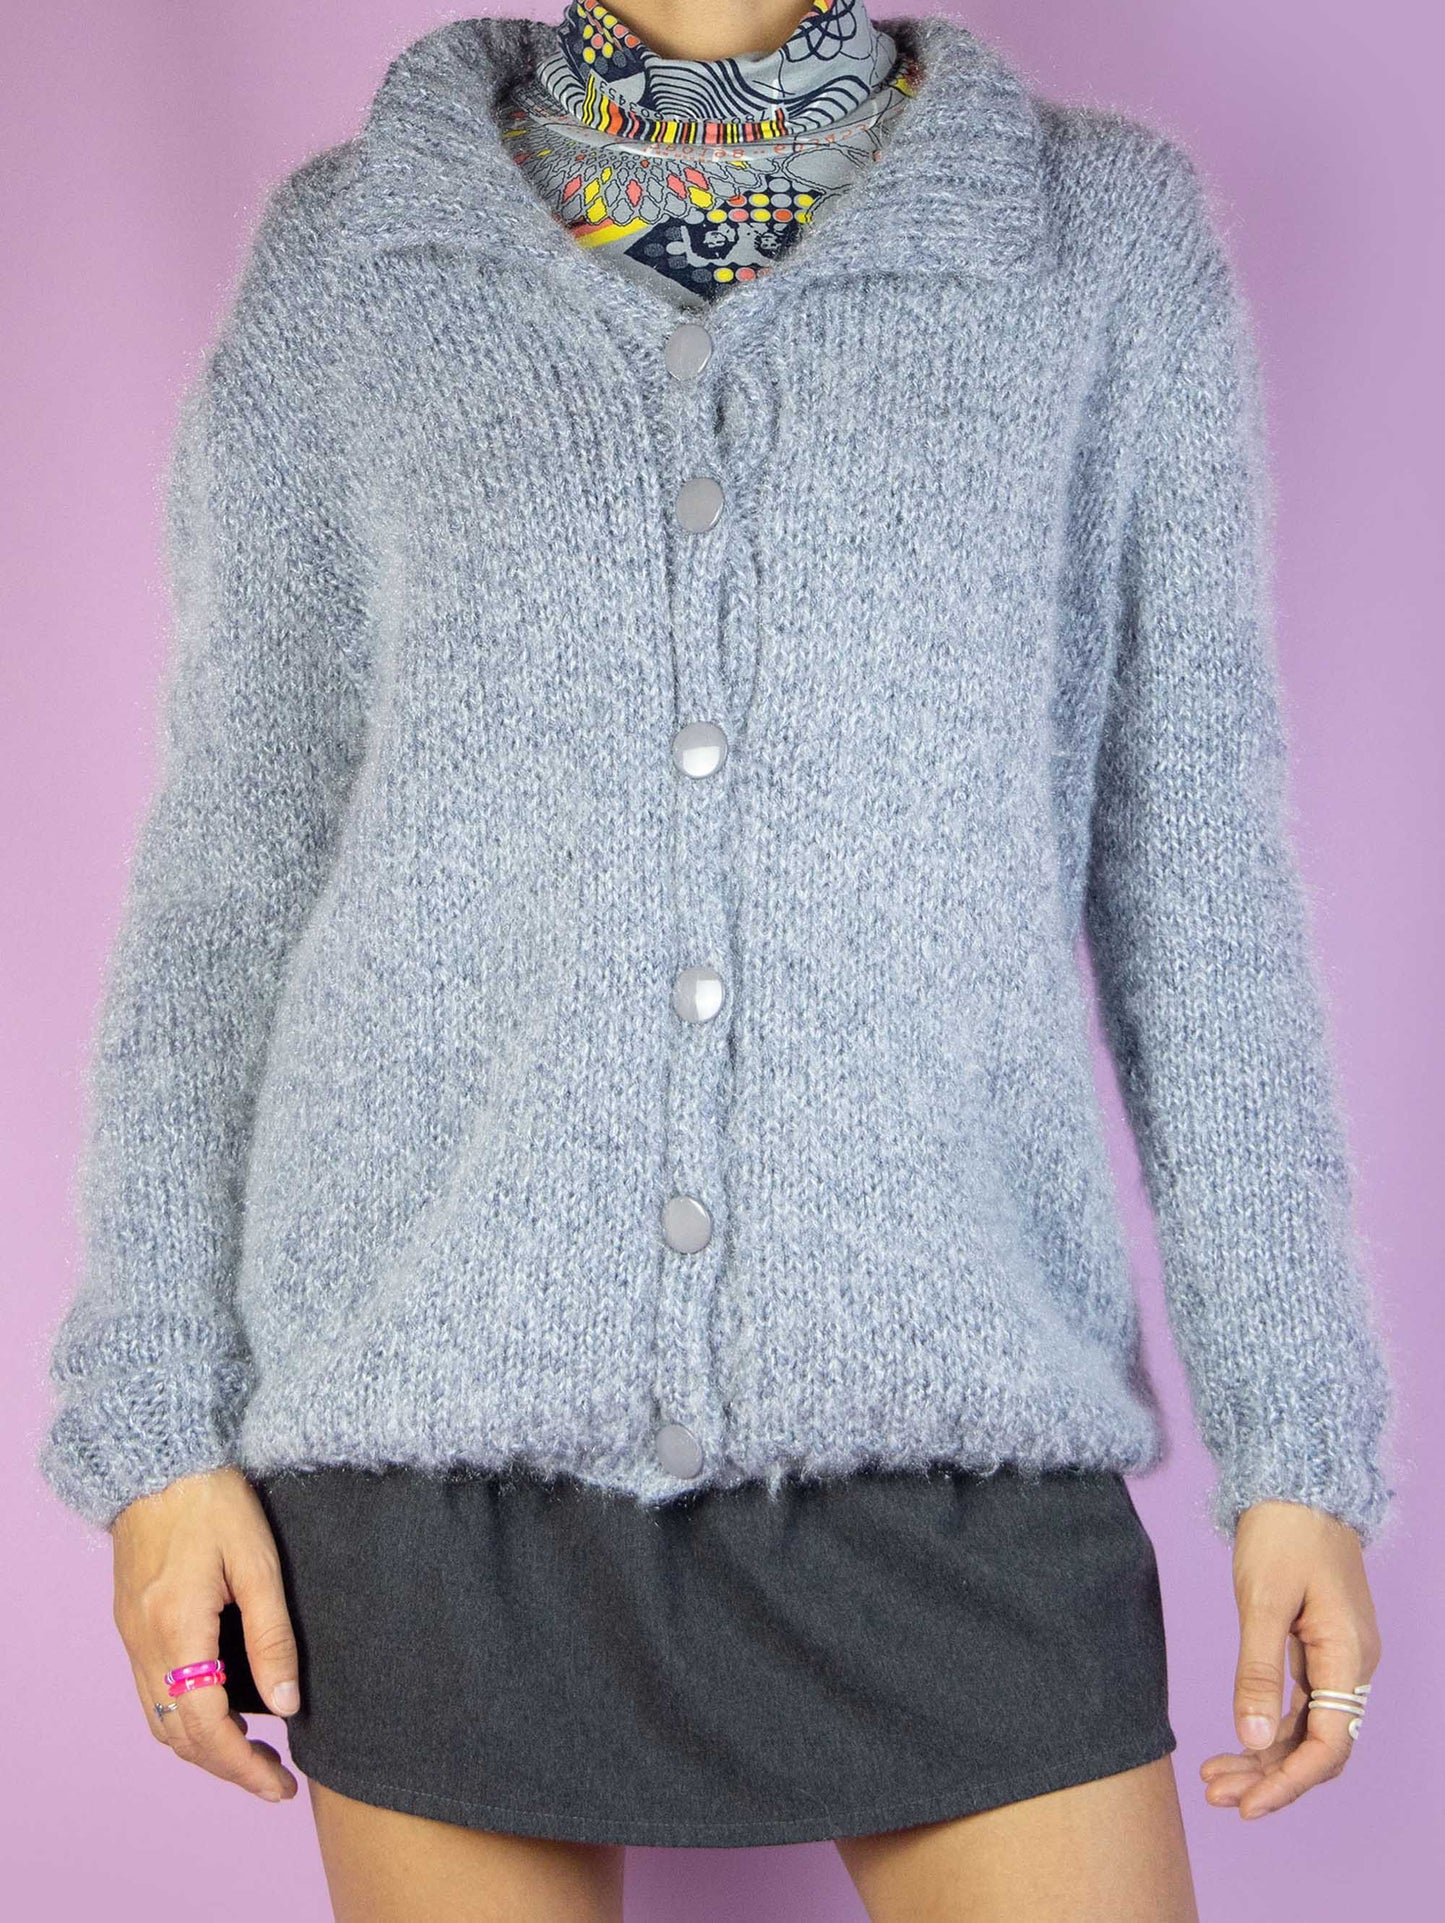 The Y2K Gray Knit Cardigan is a vintage 2000s winter fluffy knit cardigan sweater with a collar and buttons.